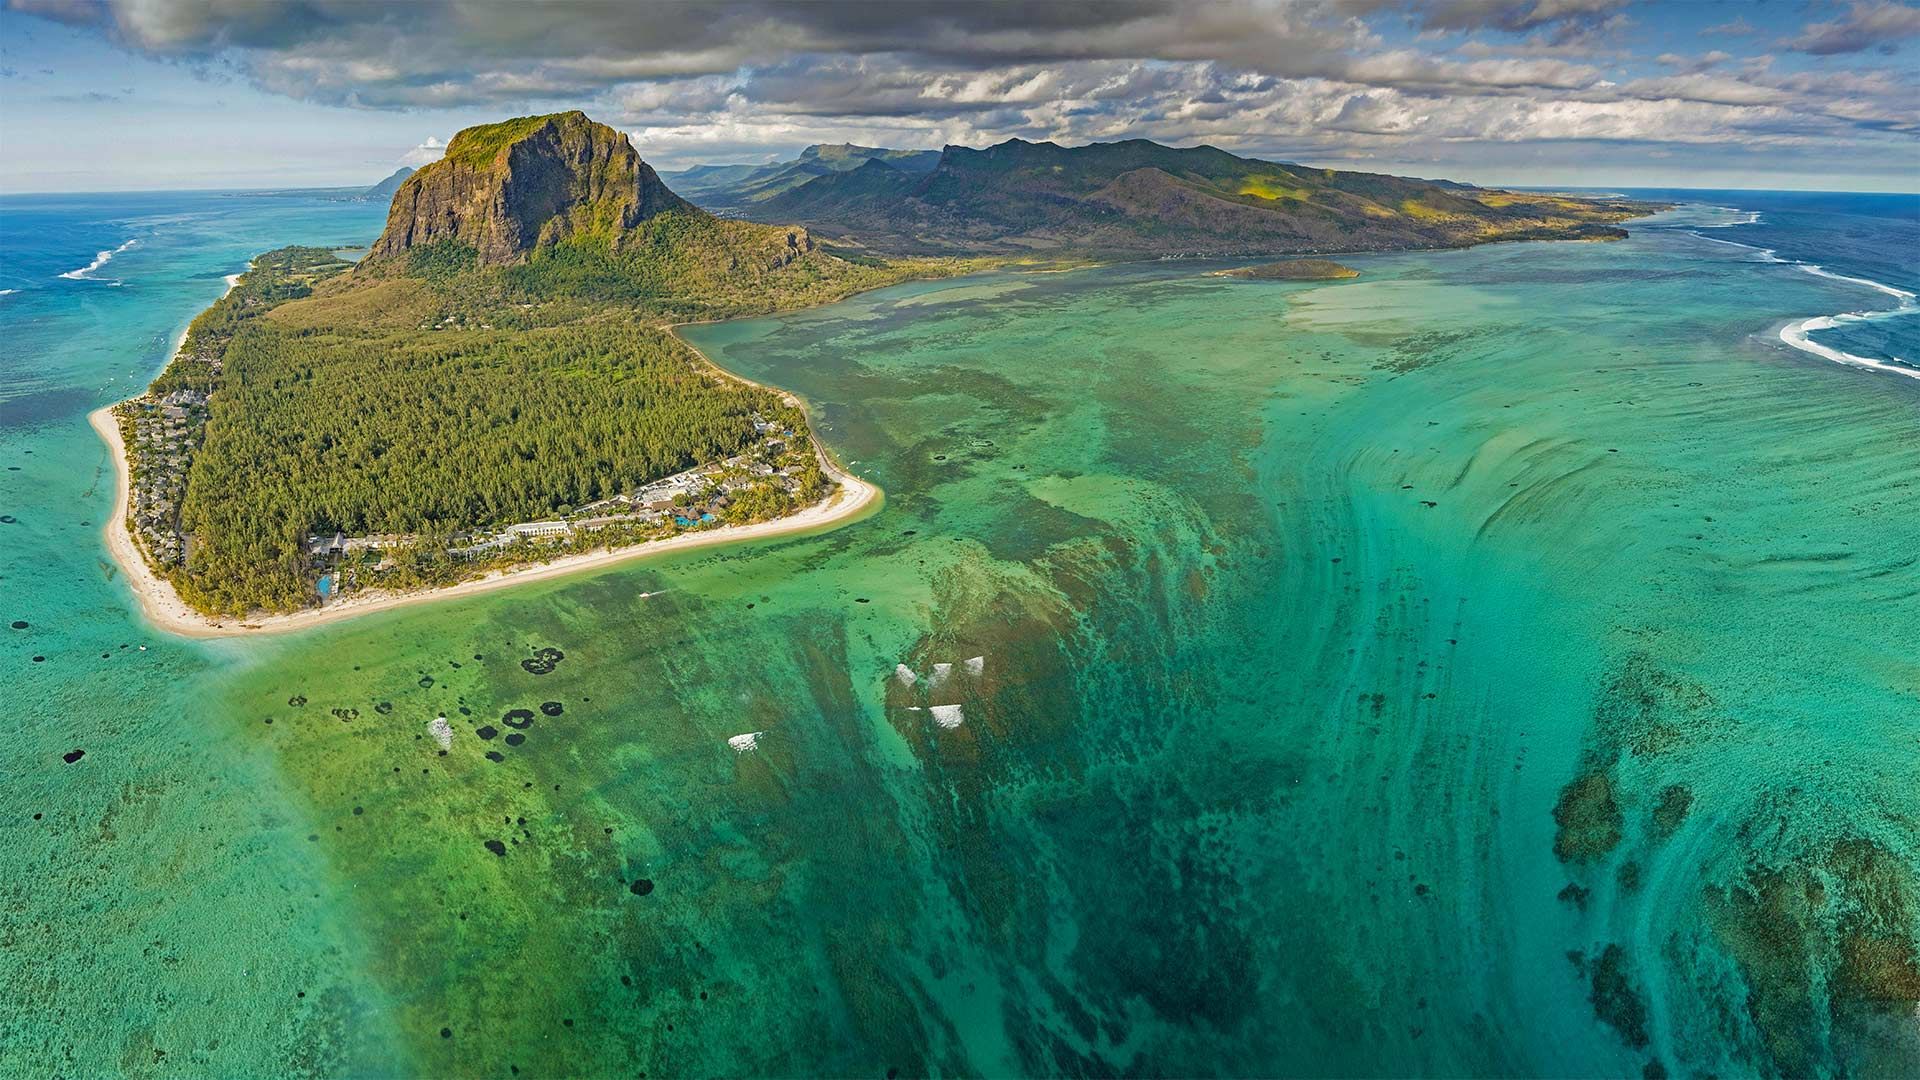 How an "underwater waterfall" came to exist on Mauritius - Big Think